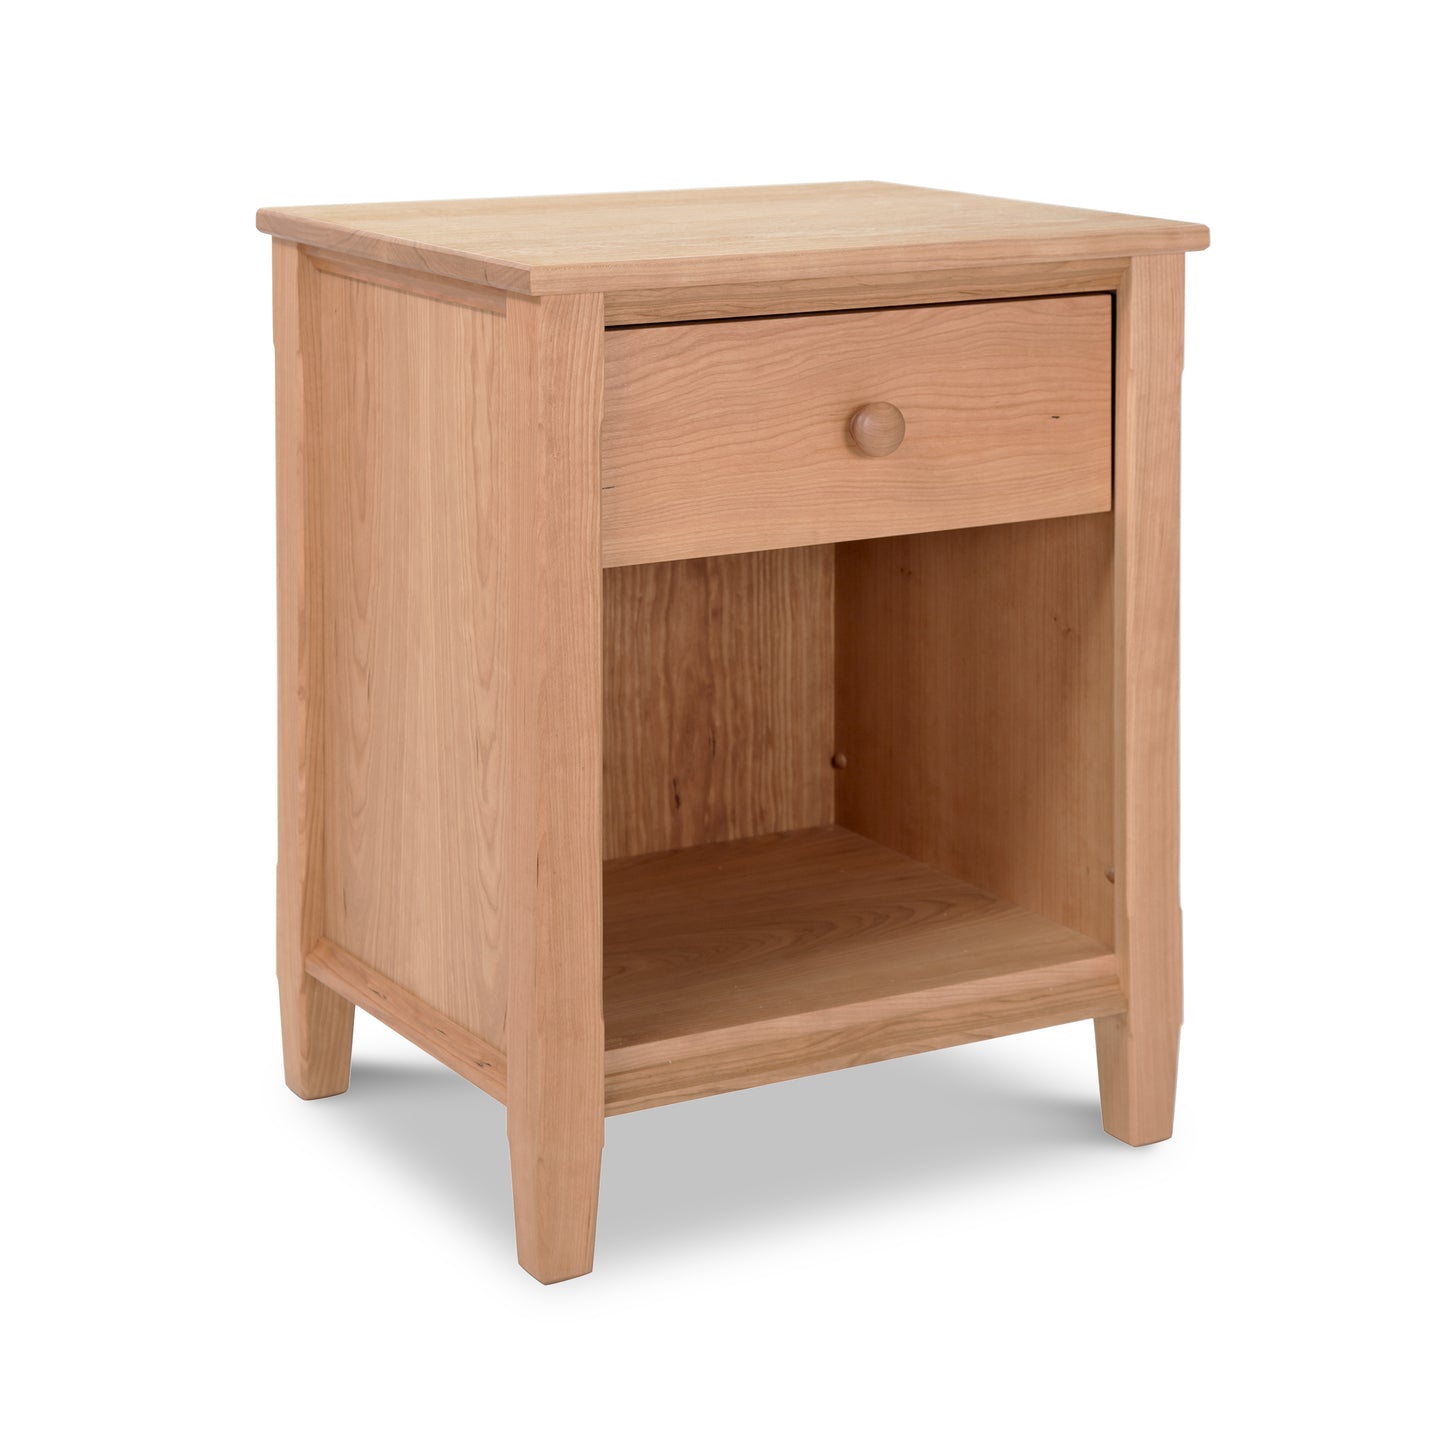 A Maple Corner Woodworks Vermont Shaker 1-Drawer Enclosed Shelf Nightstand crafted with natural hardwoods.